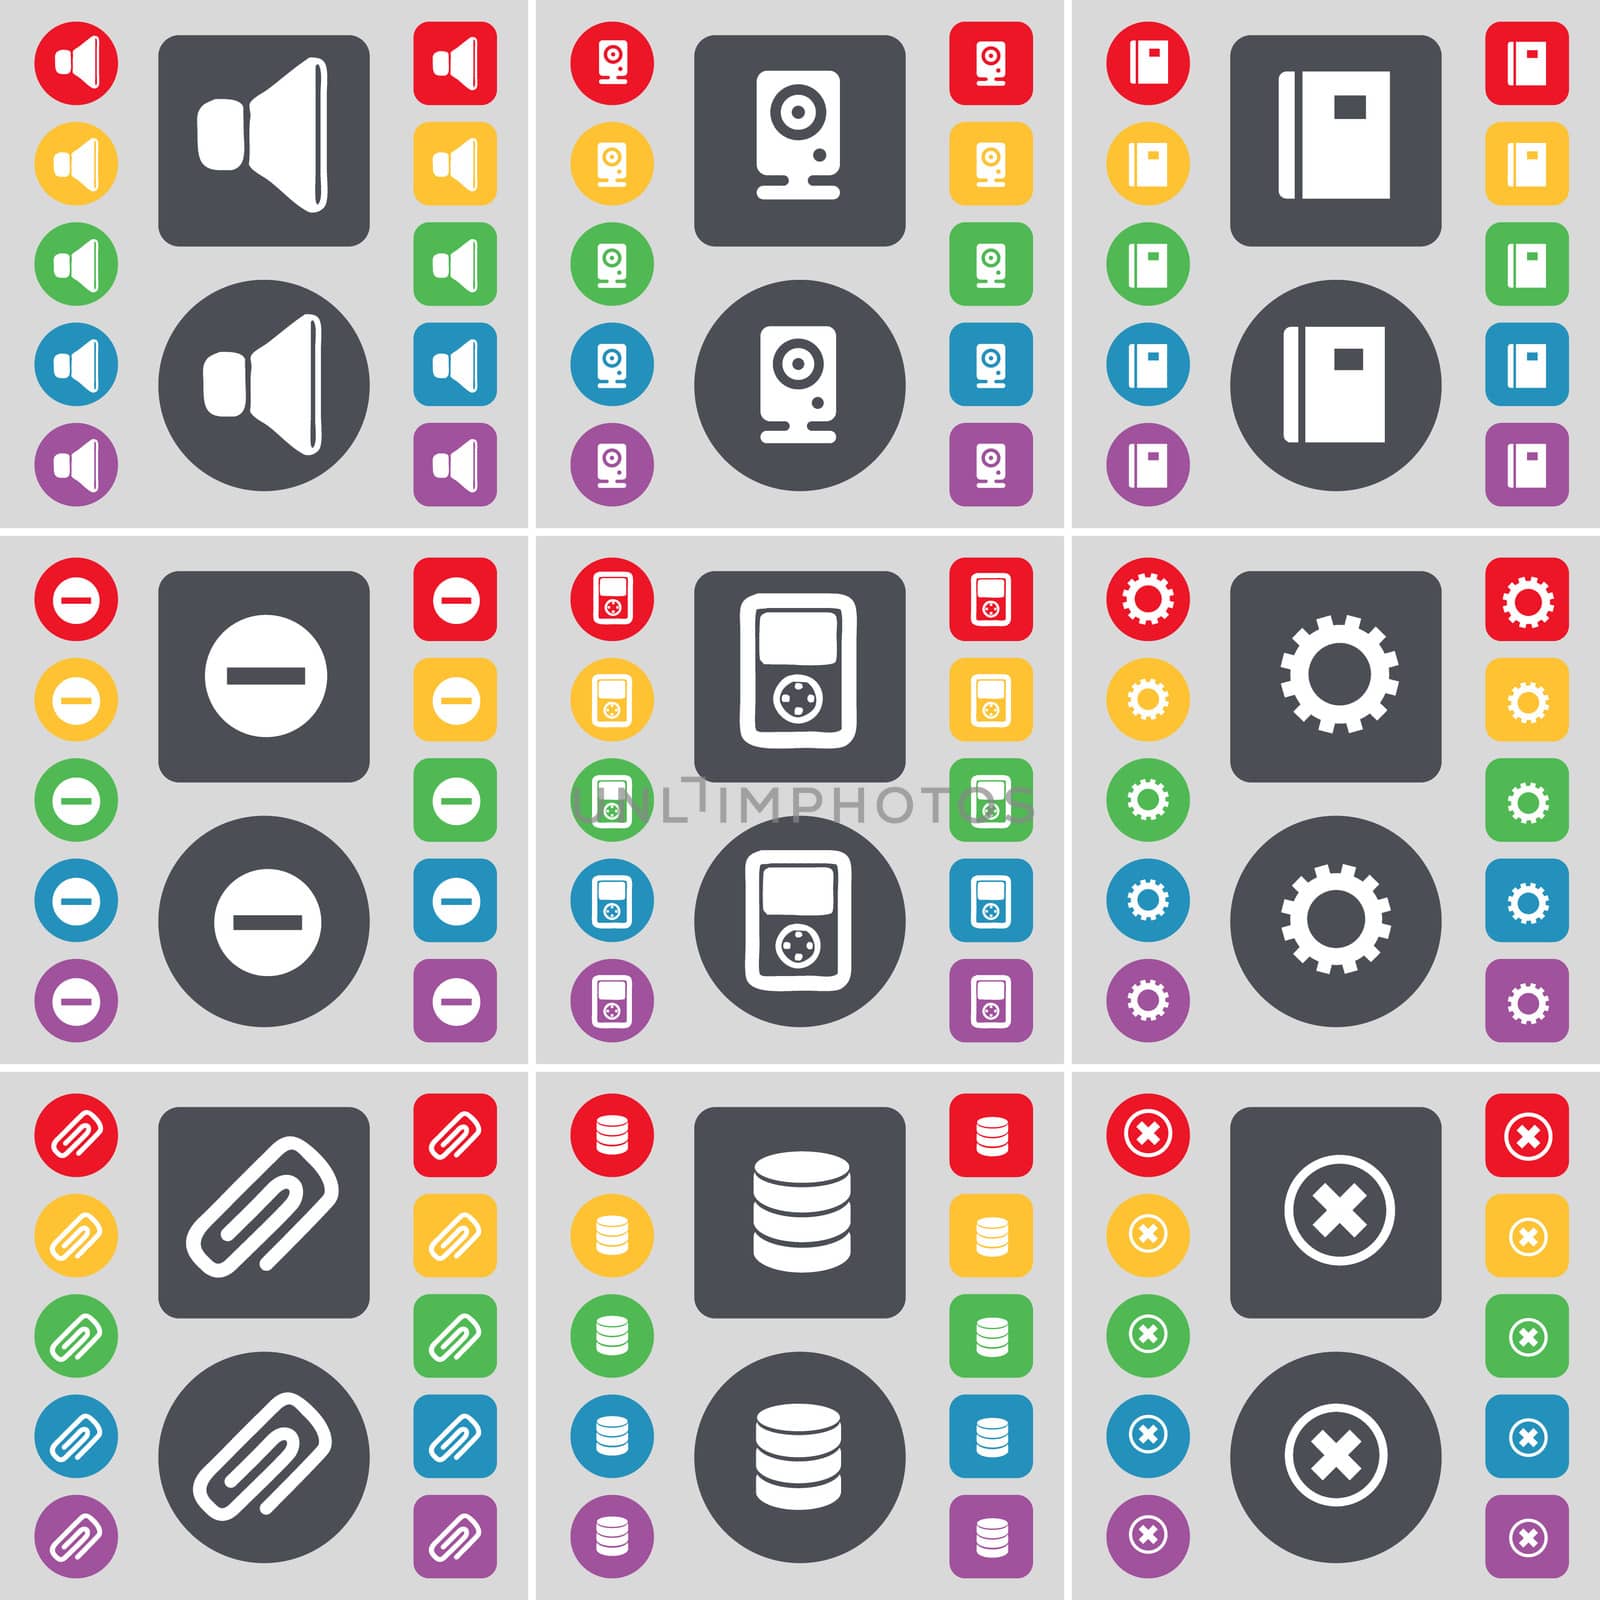 Sound, Speaker, Notebook, Minus, Player, Gear, Clip, Database, Stop icon symbol. A large set of flat, colored buttons for your design. illustration